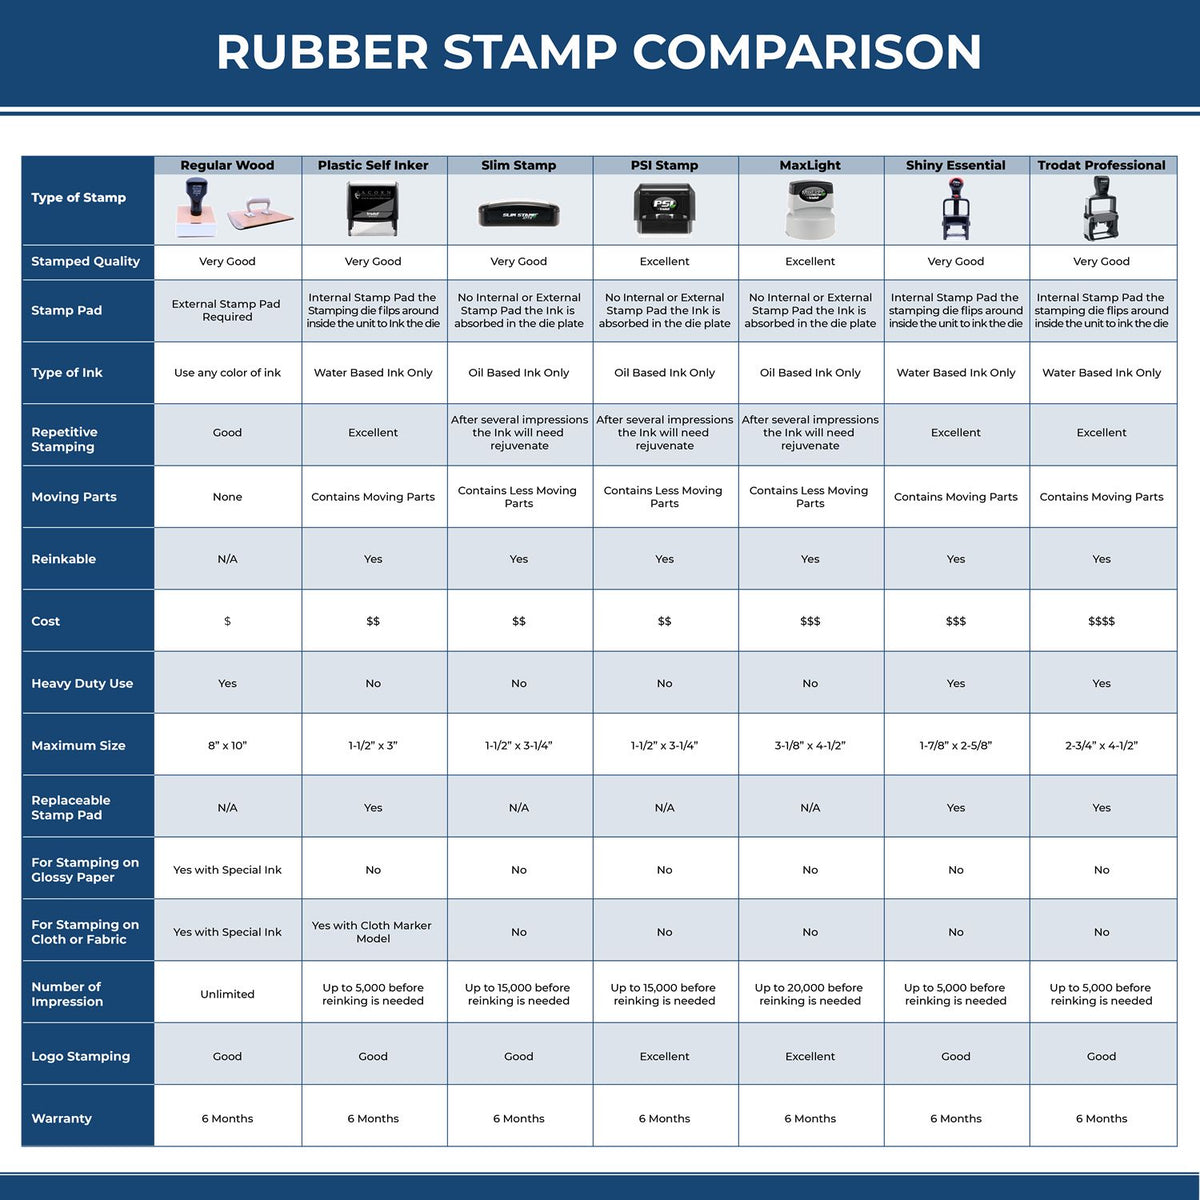 A comparison chart for the different types of mount models available for the MaxLight Premium Pre-Inked Wyoming Rectangular Notarial Stamp.